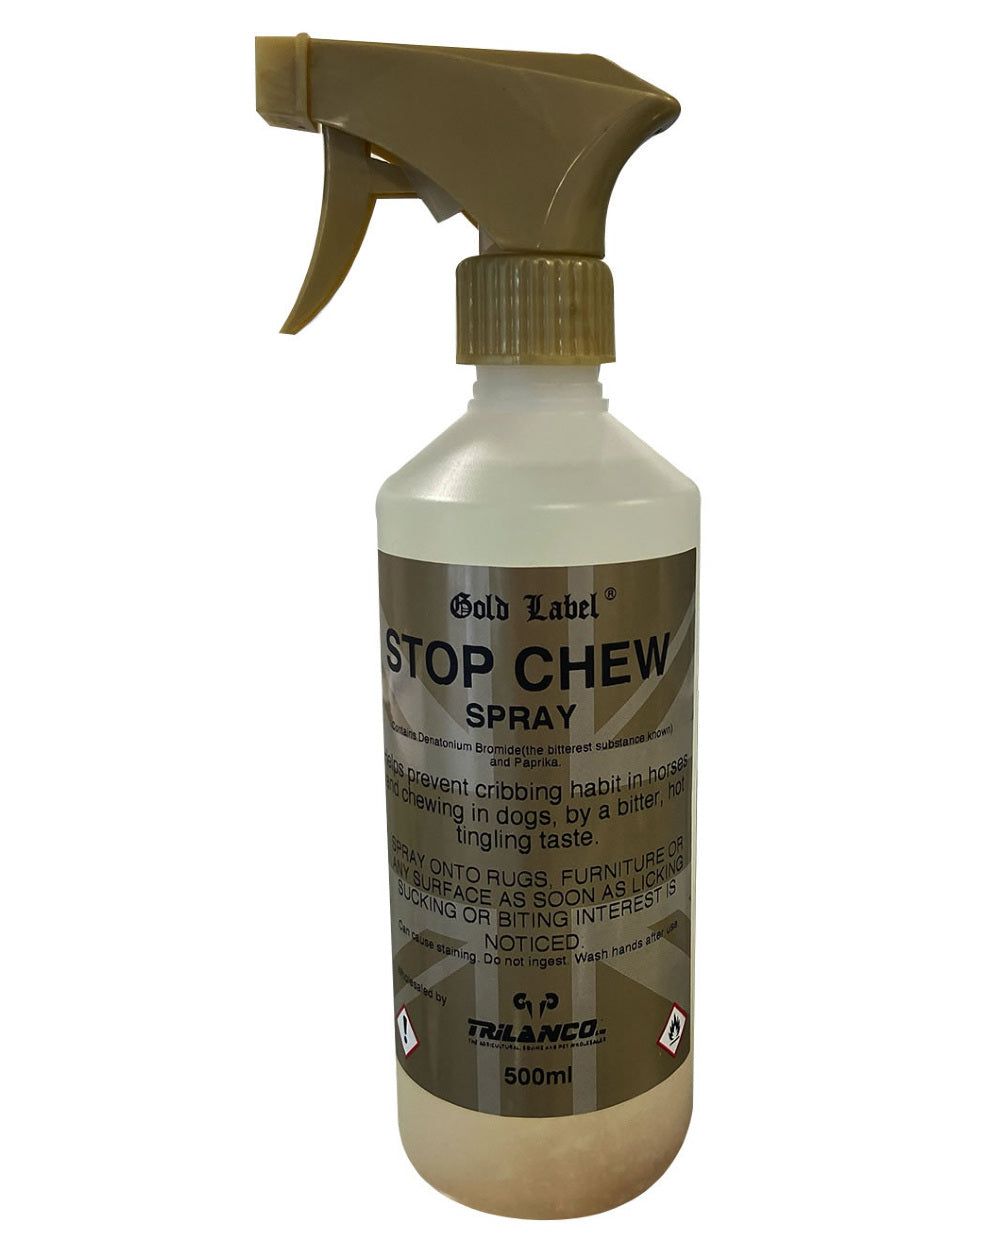 Gold Label Stop Chew Spray On A White Background